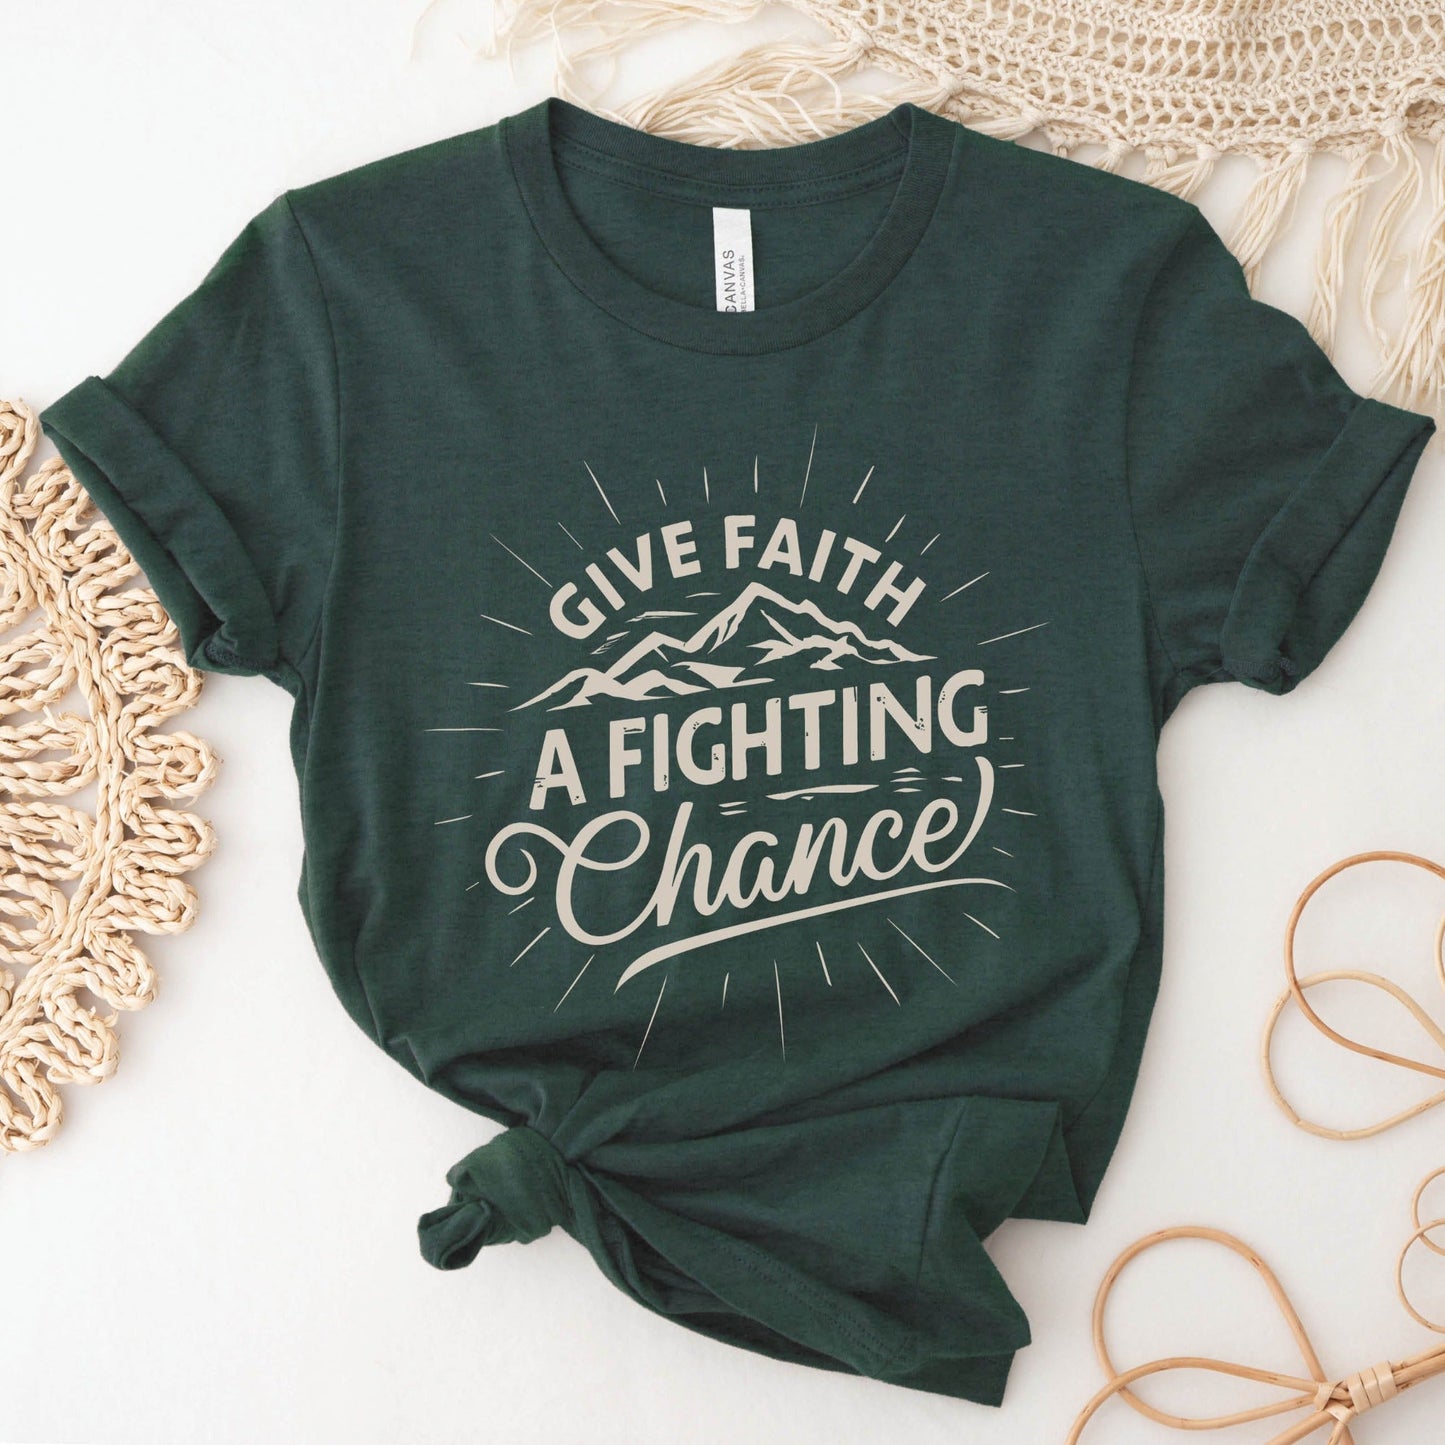 Heather Forest Dark Green Unisex Tee with Christian Bible verse quote that says, "Give Faith A Fighting Chance" with retro sunburst and mountain graphics, t-shirt designed for faith-based men and women